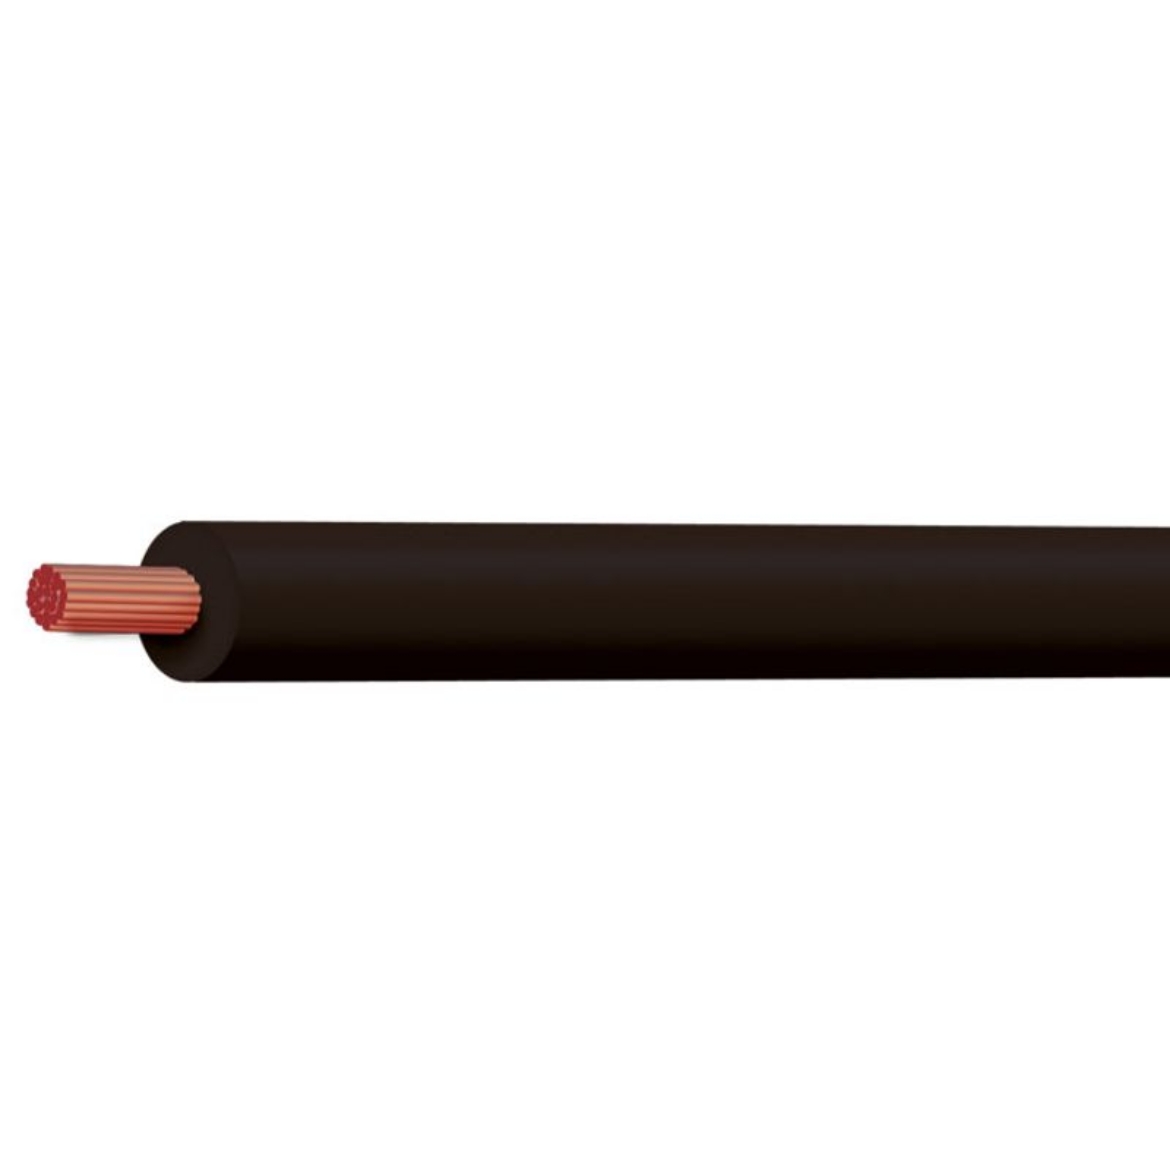 Picture of TYCAB SINGLE CORE CABLE BATTERY 00 B&S CROSS SECT 64MM SQ RATING 370A BLACK - 30M ROLL